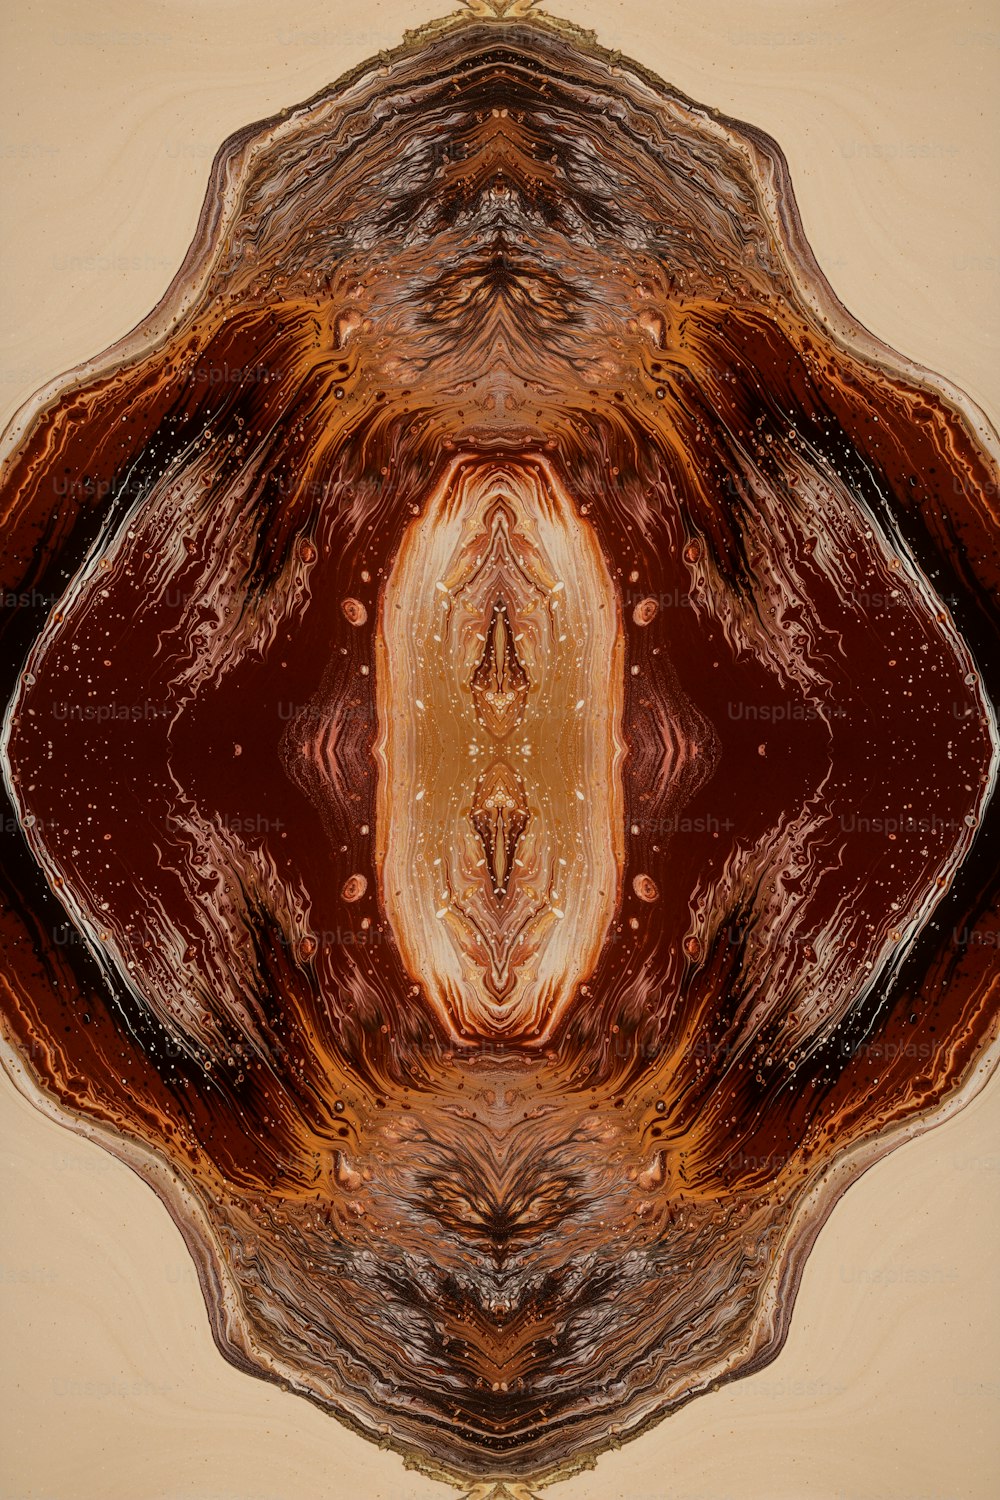 an abstract image of a brown and red object